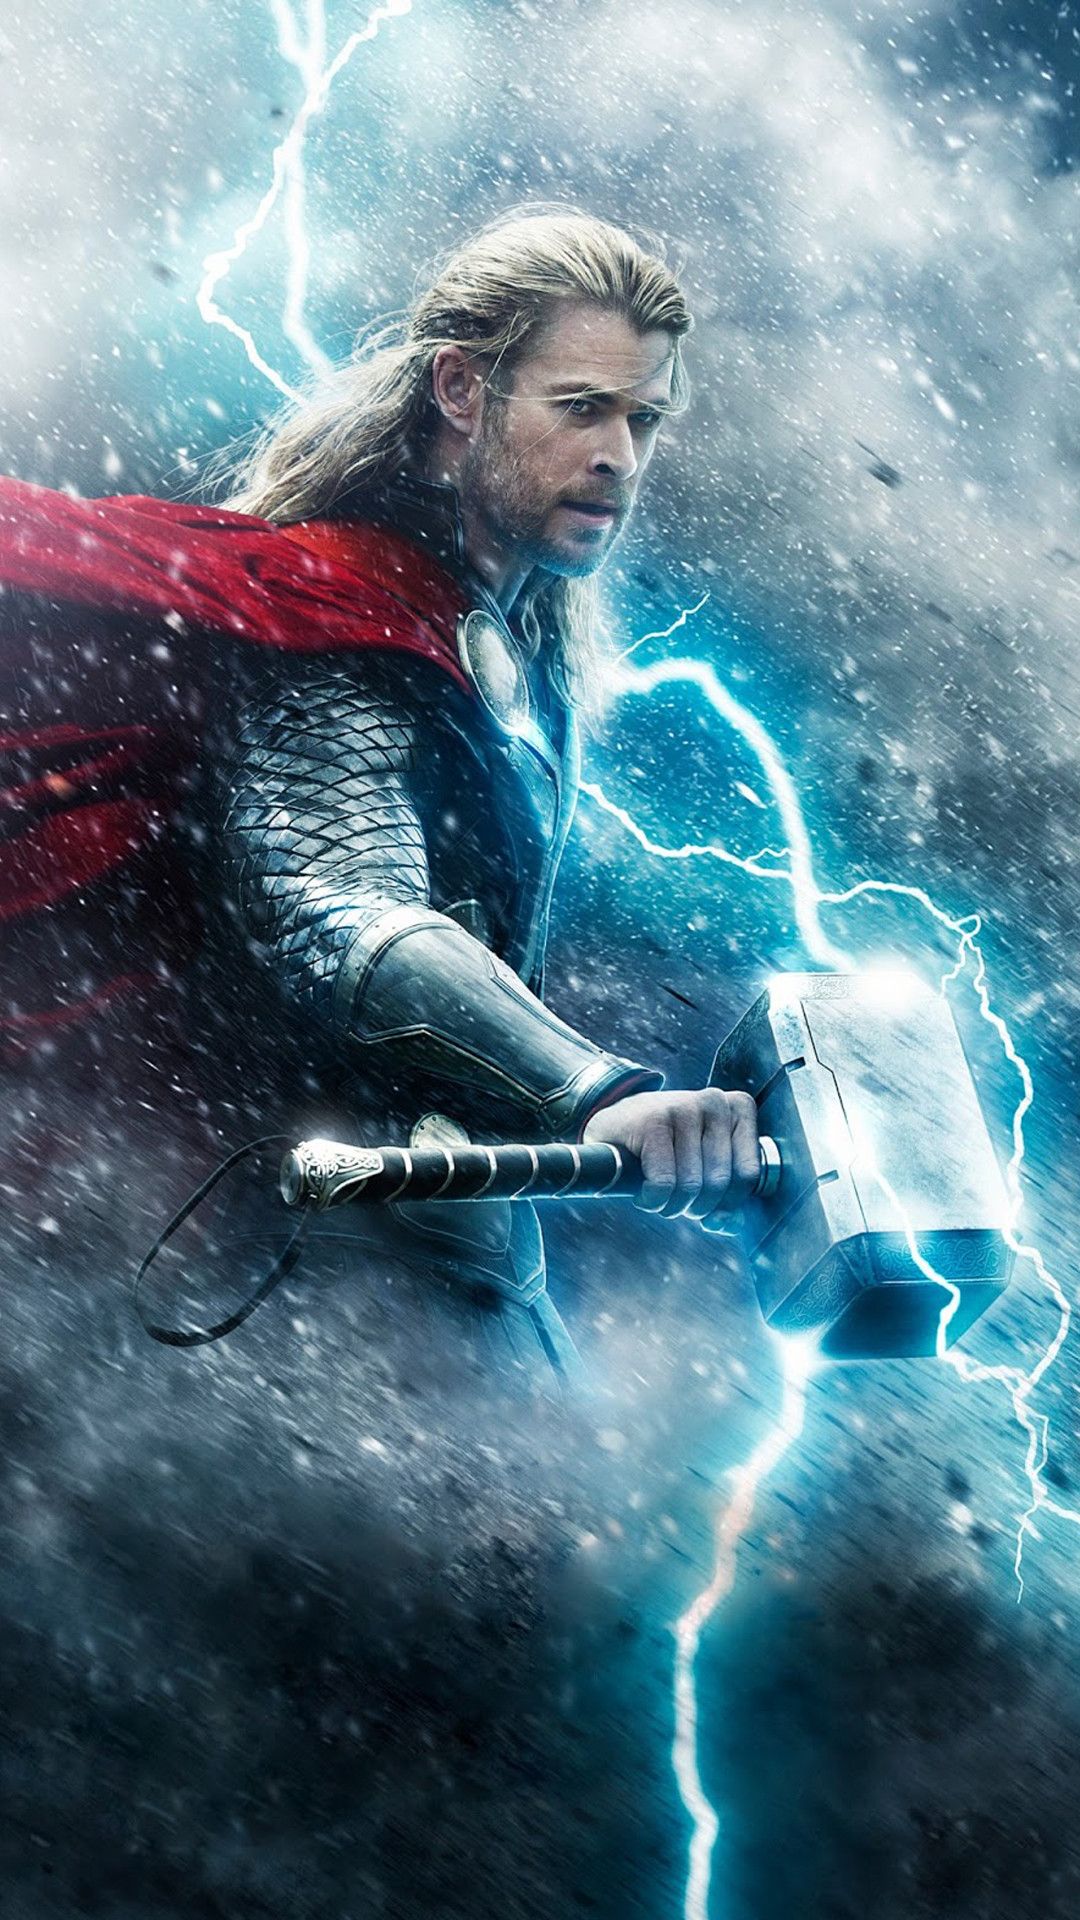 Thor with Mjolnir and Stormbreaker iPhone Wallpaper - iPhone Wallpapers |  Thor wallpaper, Marvel wallpaper, Avengers wallpaper